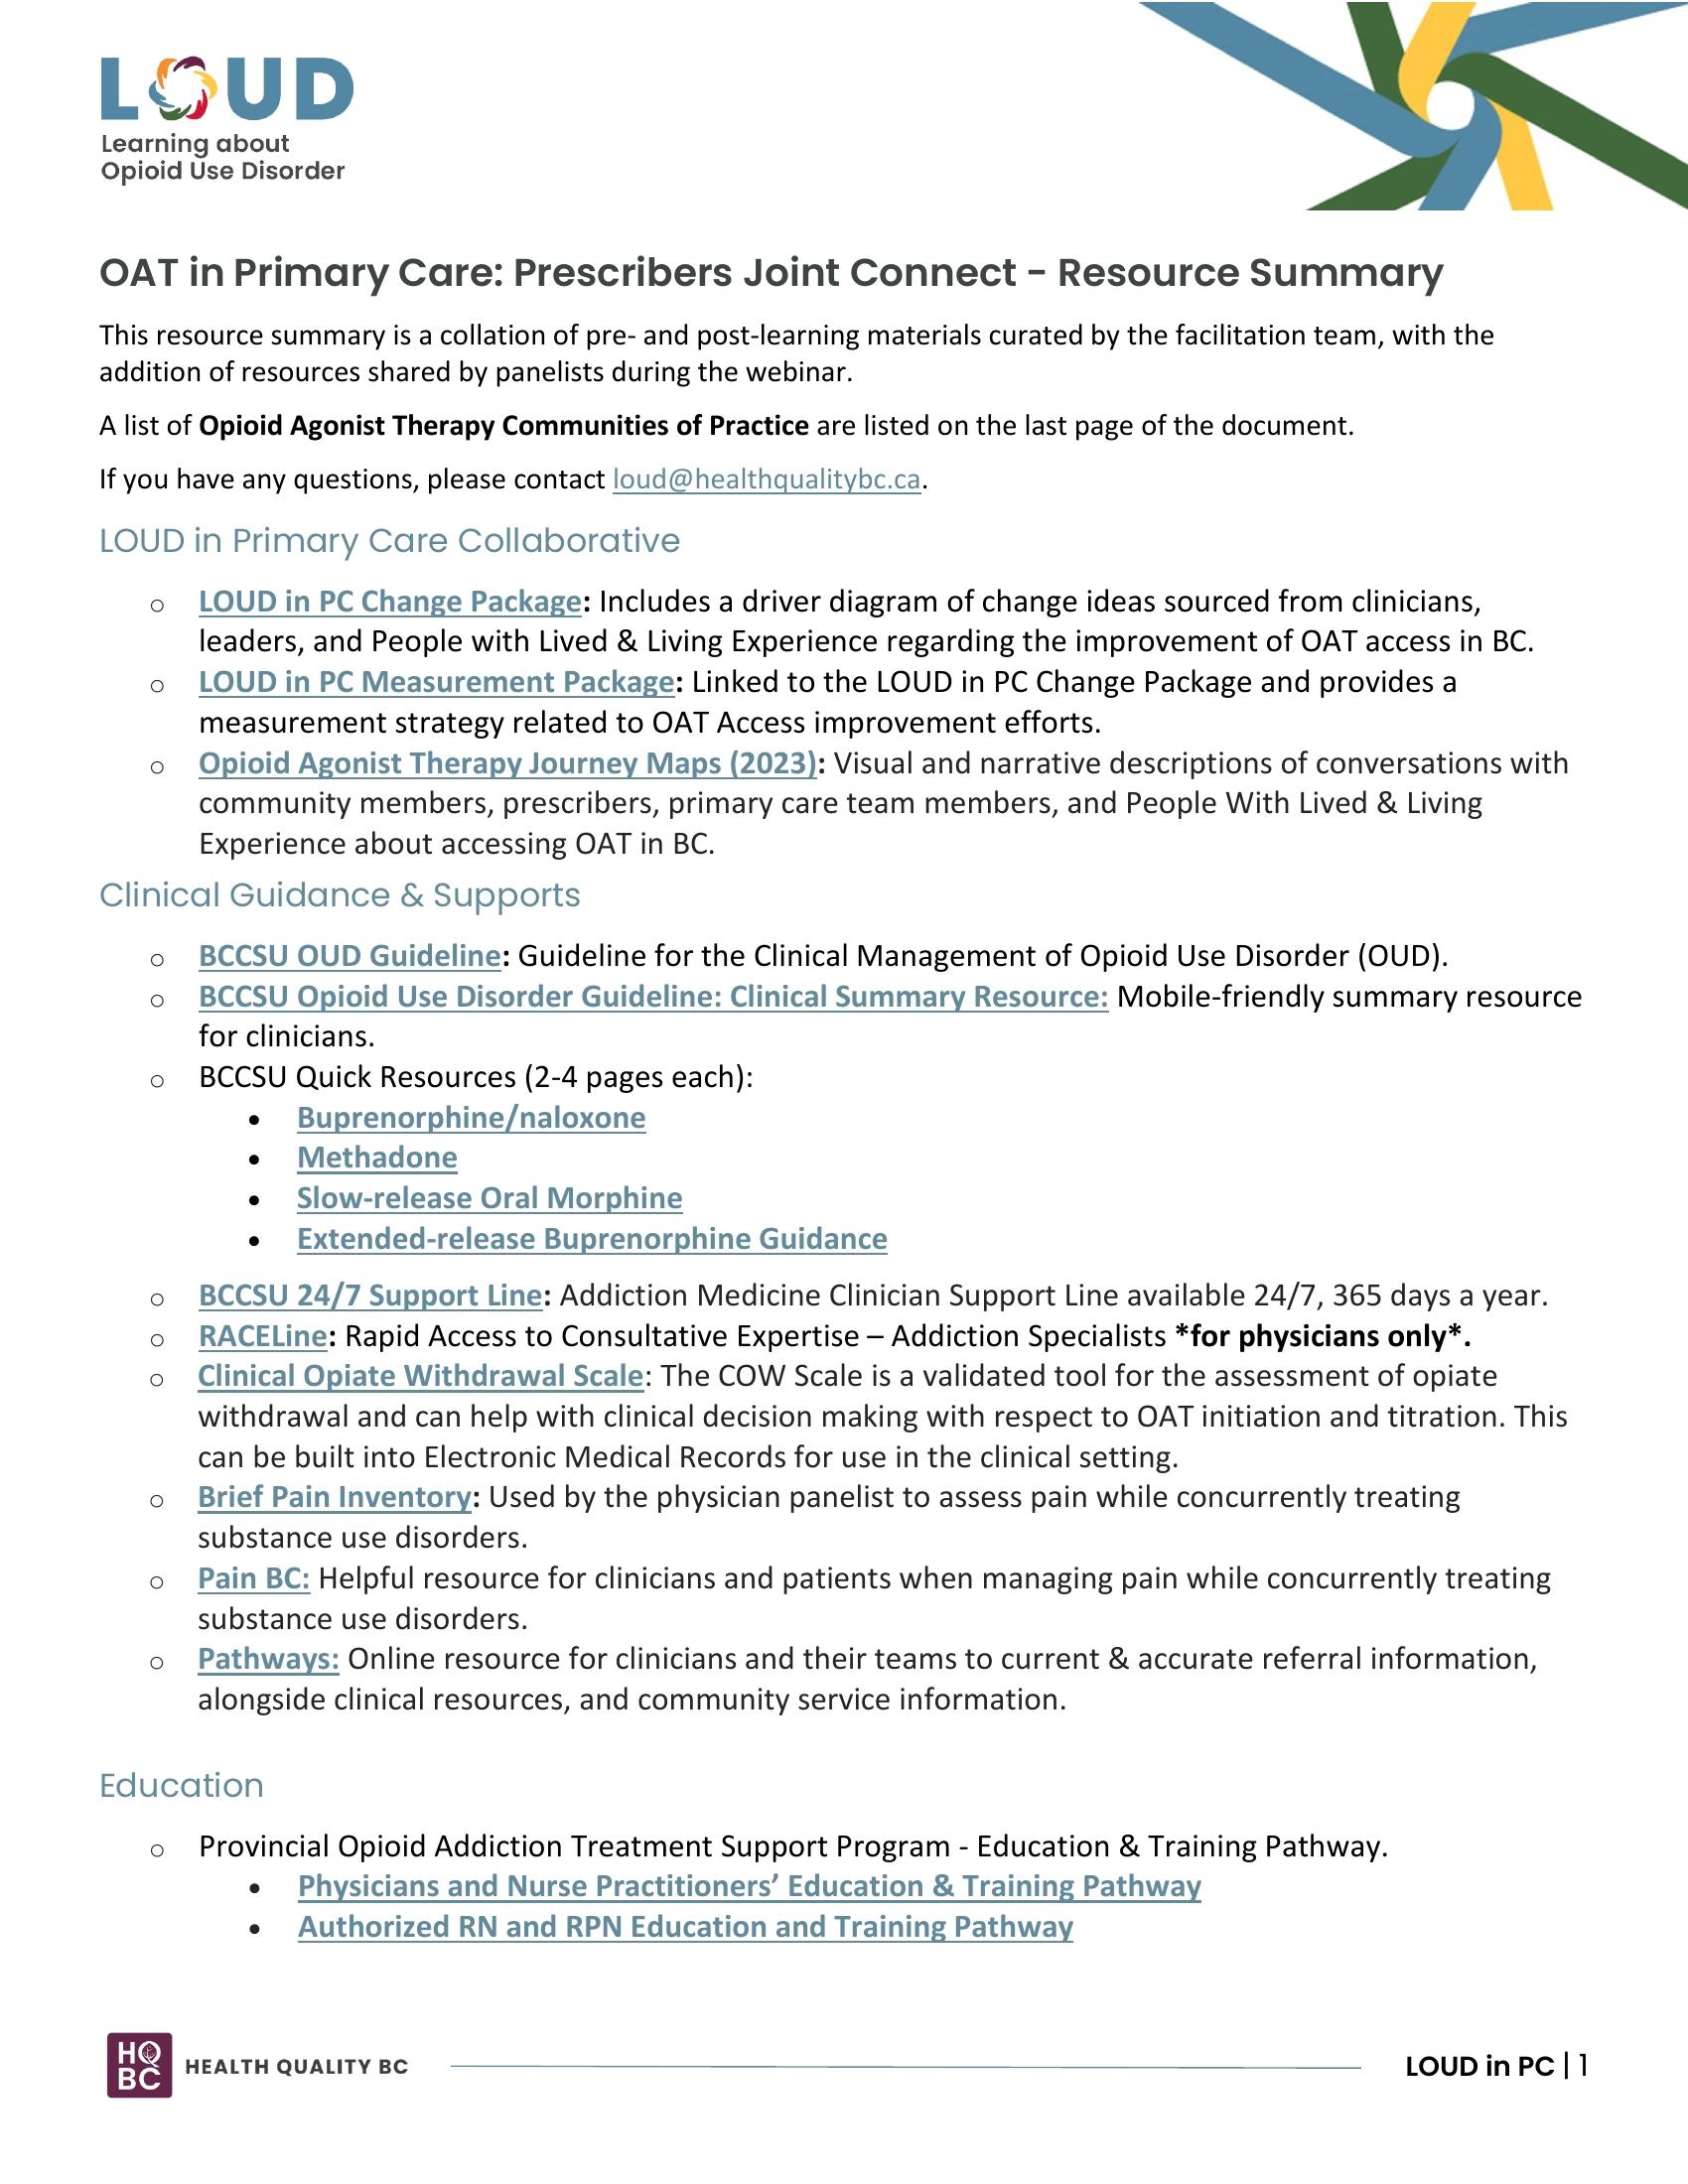 OAT In Primary Care Prescriber Joint-Connect Apr 16 - Resource Summary Thumbnail